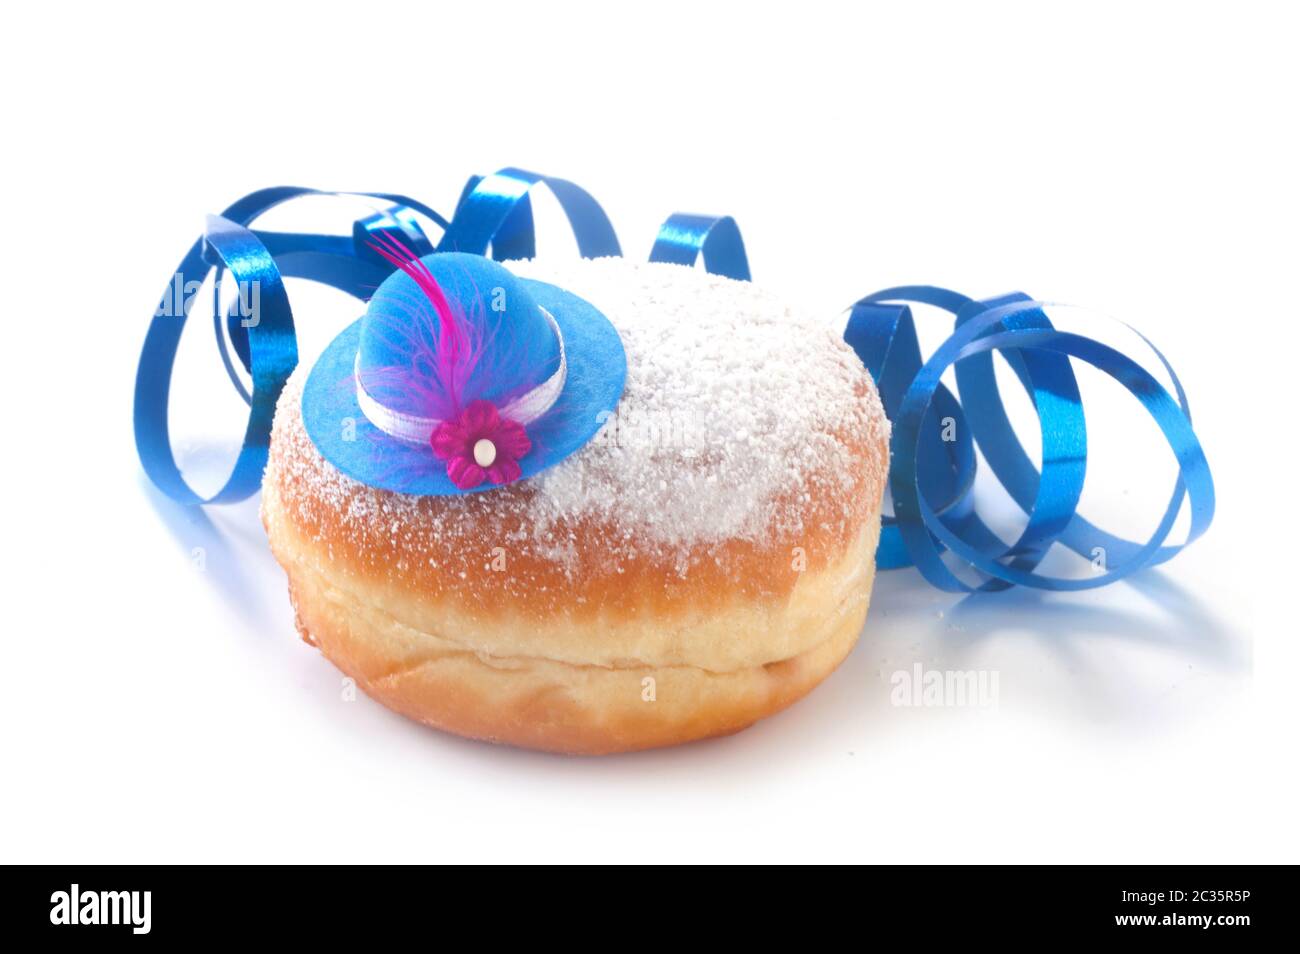 Doughnut For Carnival With A Party Hat Isolated On White Stock Photo